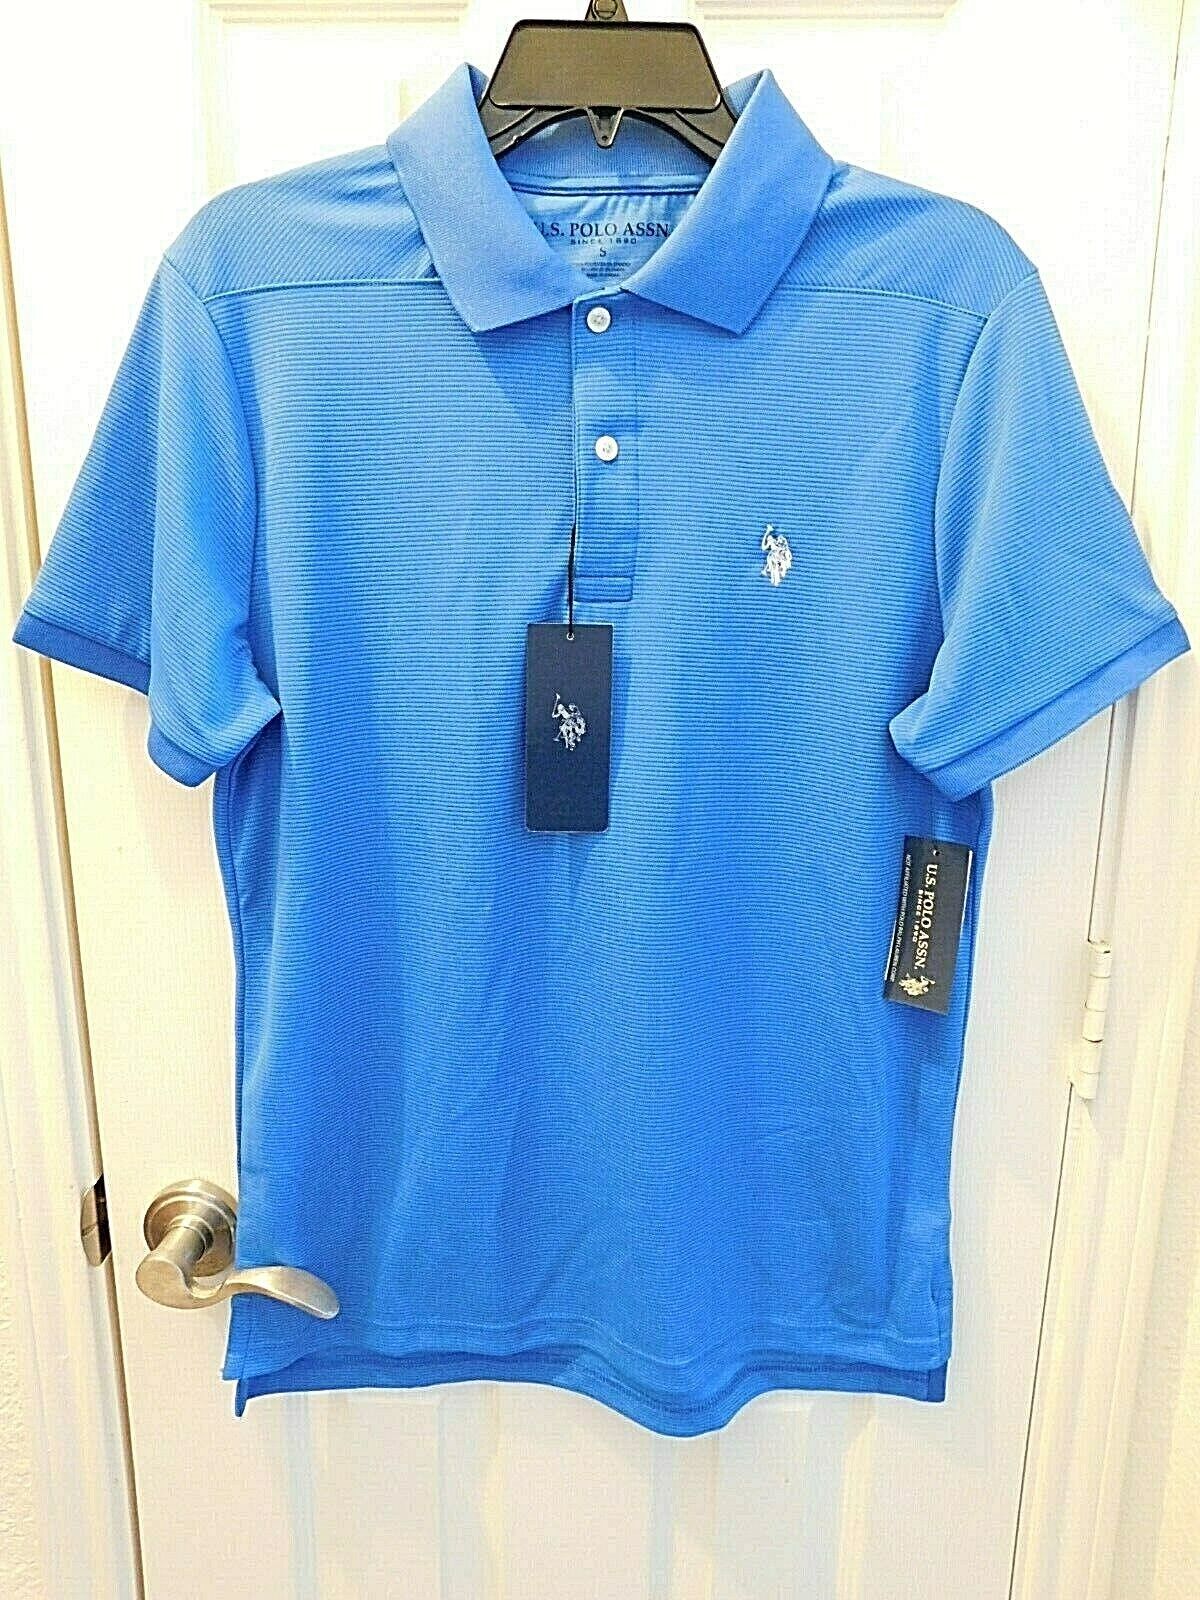 Primary image for U.S. POLO ASSN. Men's Performance Short Sleeve Polo Shirt X-LARGE Palace Blue